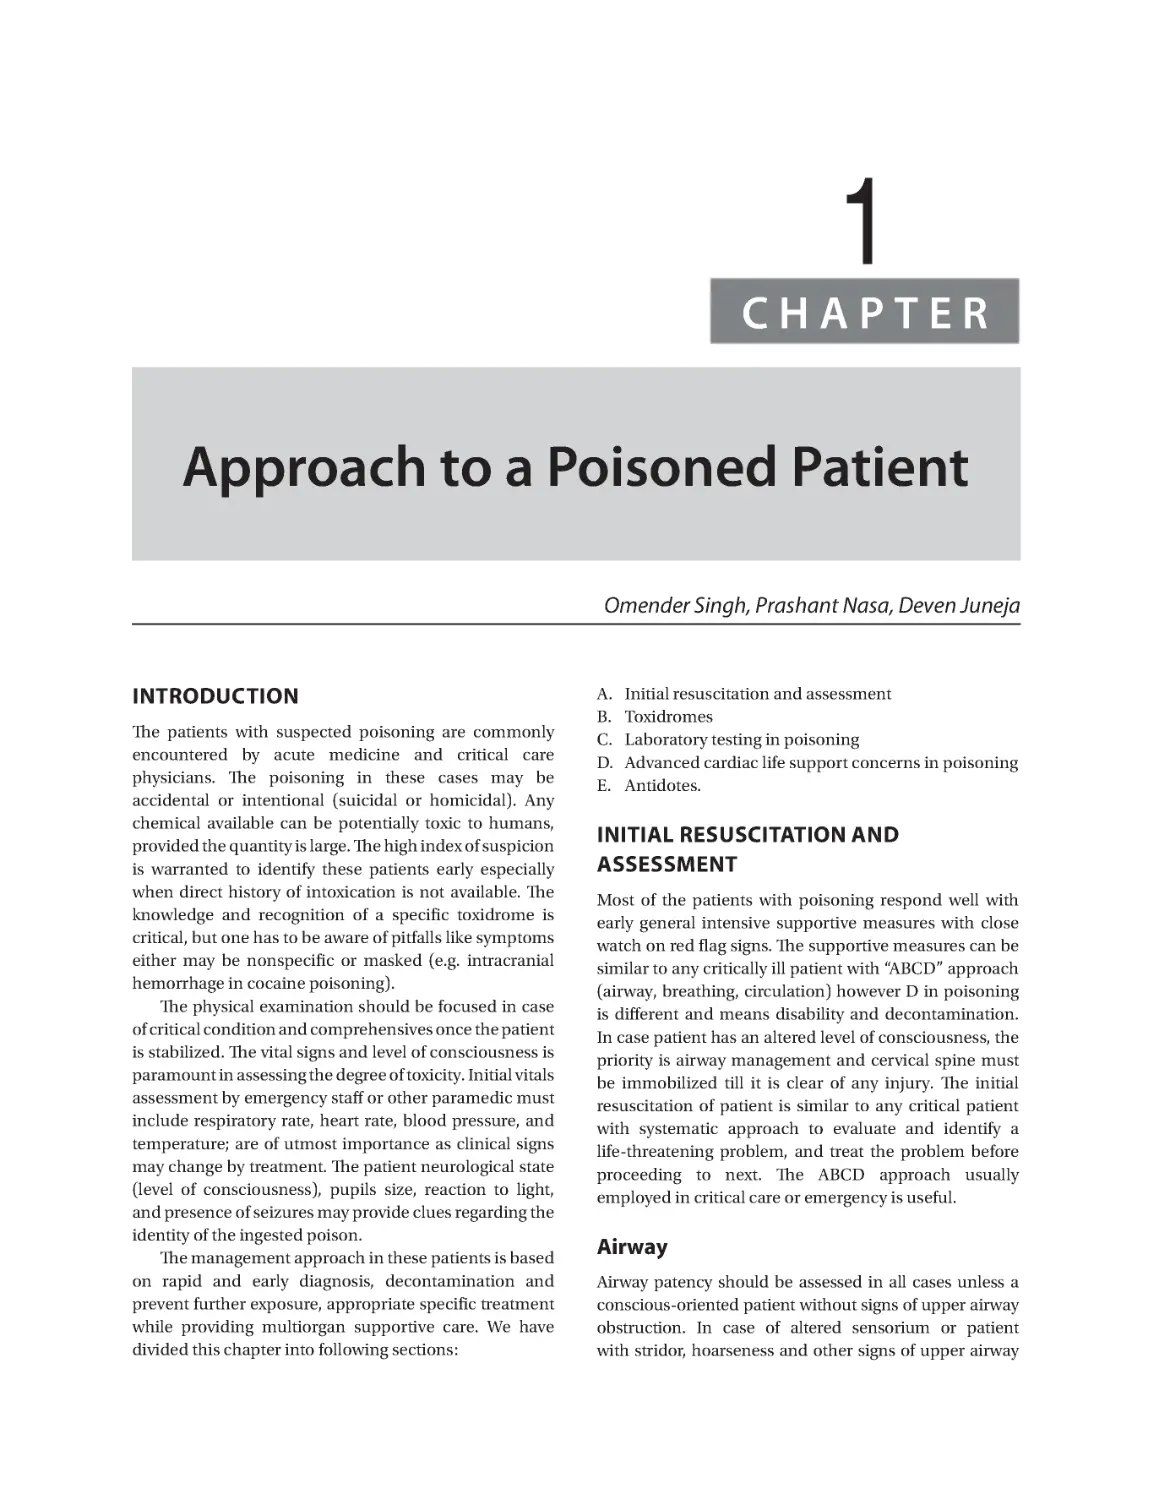 Chapter 1: Approach to a Poisoned Patient